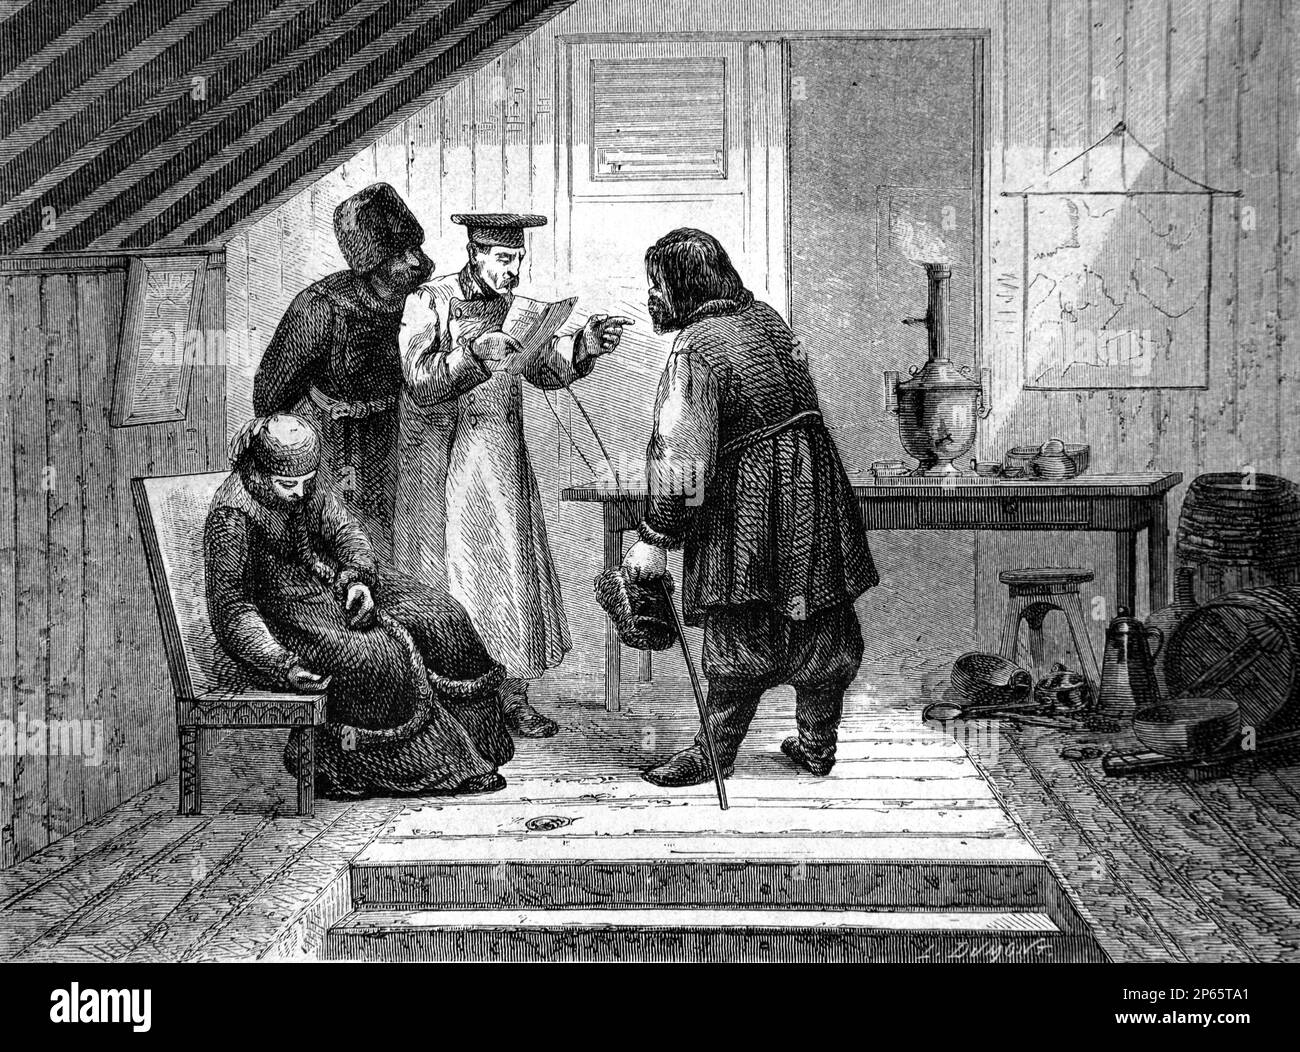 Man Reading Letter in Postal Relay Station, Staging Post or Stage Stop in Siberia Russia. Vintage Engraving or Illustration 1862 Stock Photo